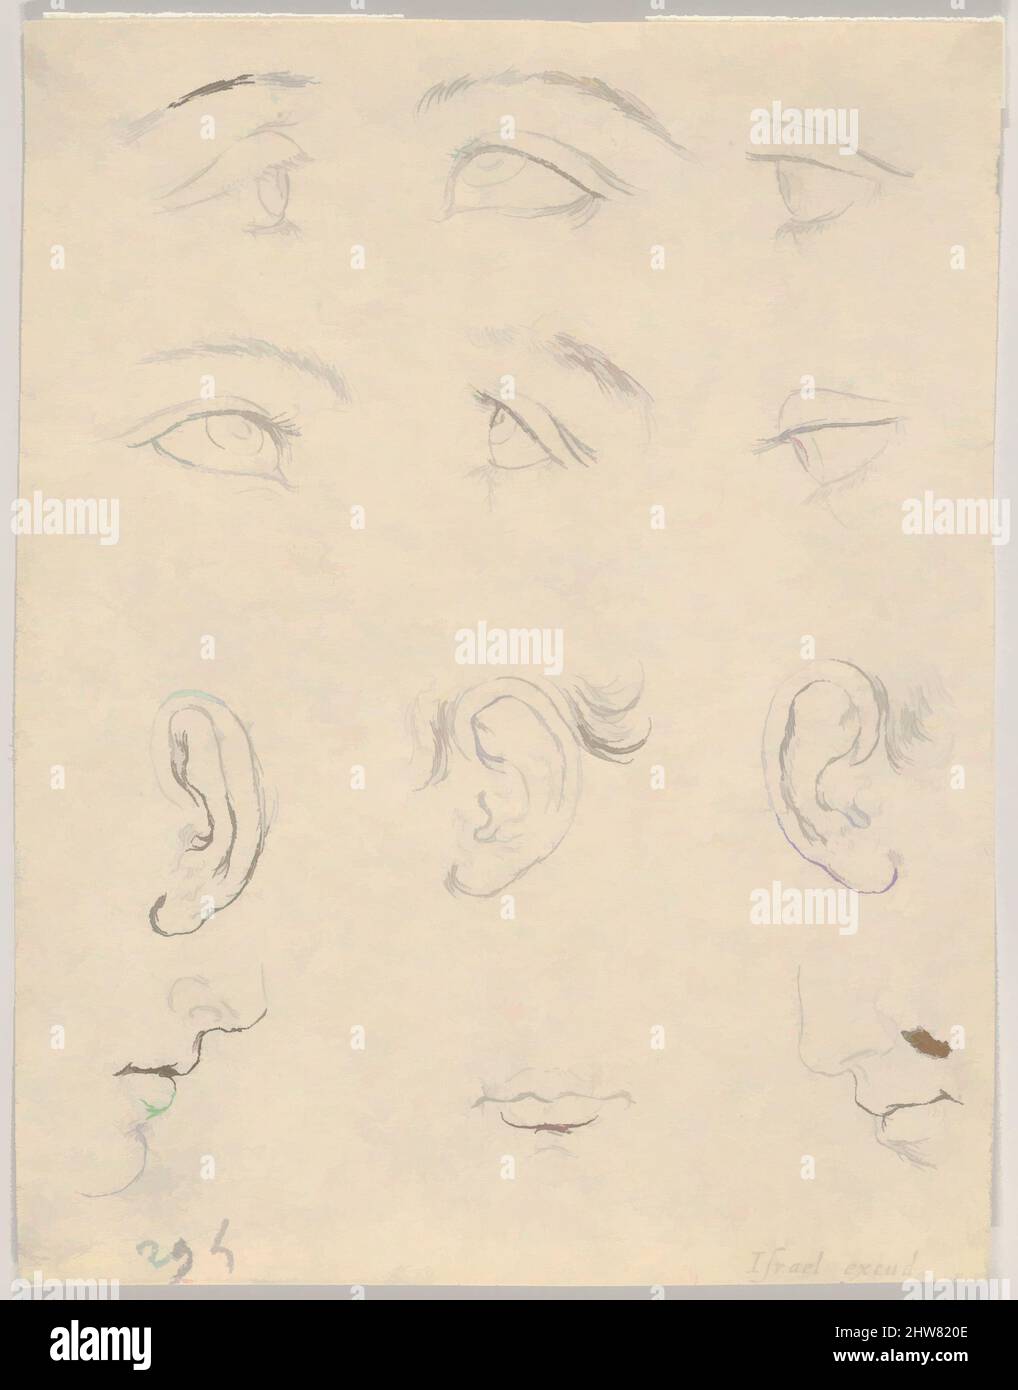 Art inspired by Plate 3: six eyes, three Ears, two Profiles, and a mouth, from 'The Book for Learning to Draw' (Livre pour apprendre à dessiner), ca. 1649, Etching, Sheet: 3 1/4 x 2 1/2 in. (8.3 x 6.4 cm), Prints, Stefano della Bella (Italian, Florence 1610–1664 Florence, Classic works modernized by Artotop with a splash of modernity. Shapes, color and value, eye-catching visual impact on art. Emotions through freedom of artworks in a contemporary way. A timeless message pursuing a wildly creative new direction. Artists turning to the digital medium and creating the Artotop NFT Stock Photo